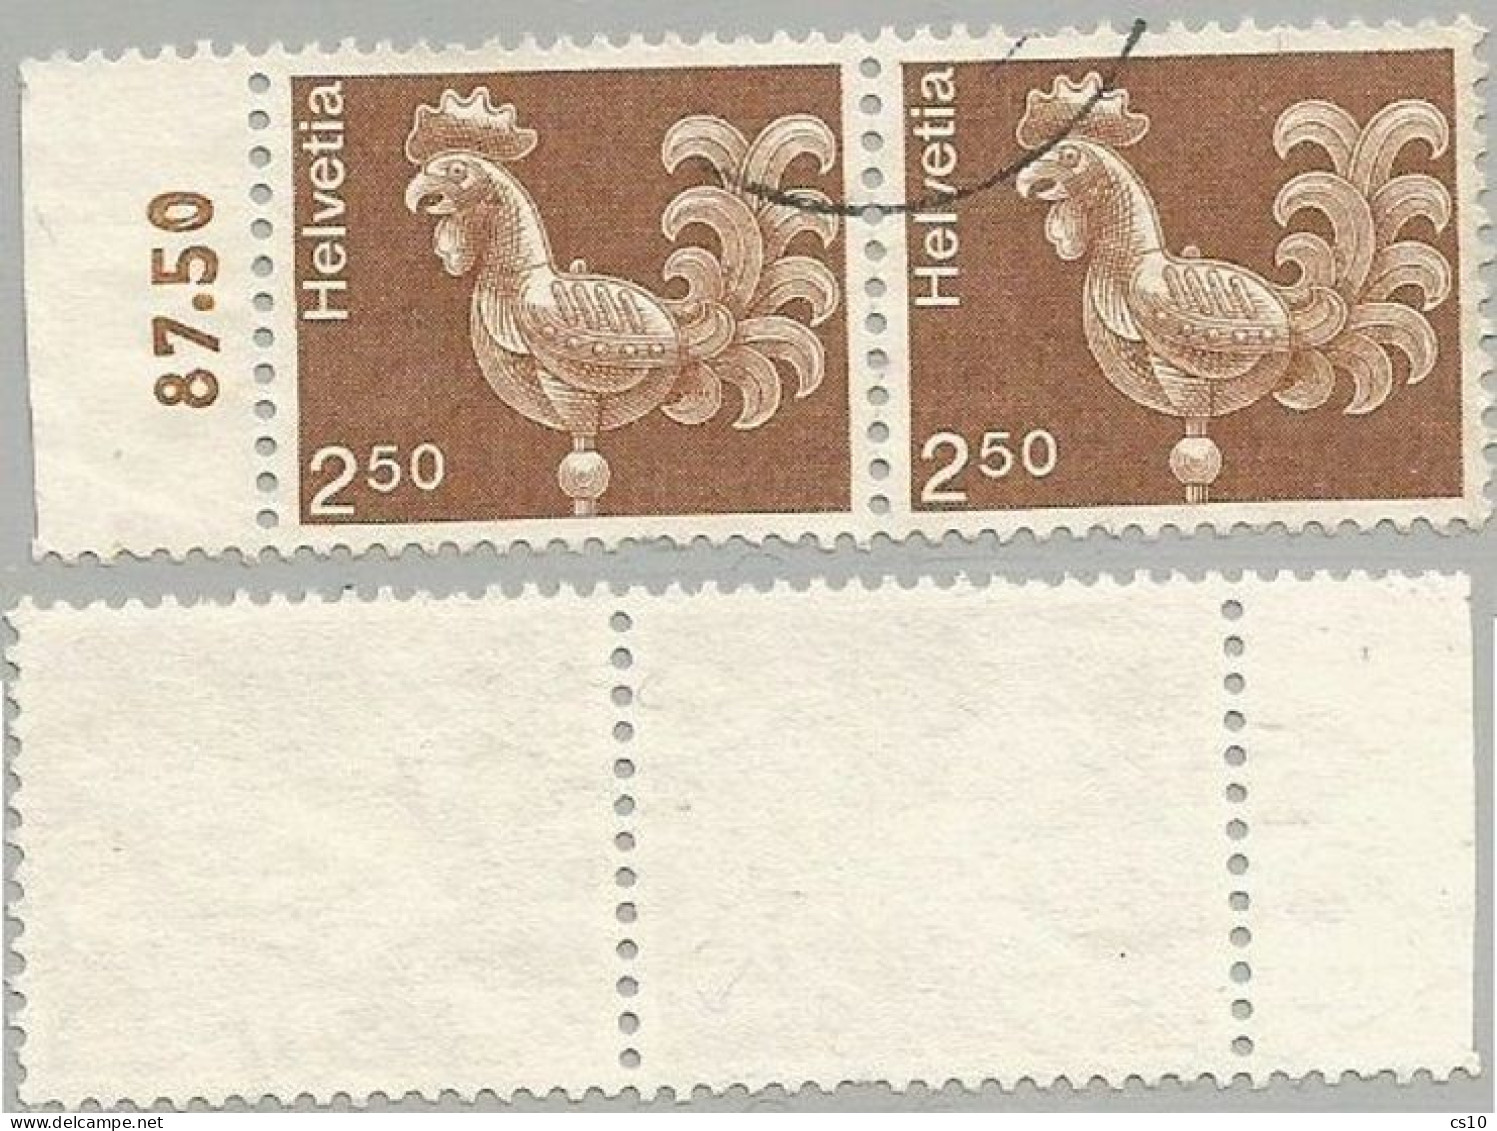 Suisse 1975 Artworks Wheatercock FS.2,50 - Scarce Variety NON FLUO PAPER - #2 Pcs In Horiz. Pair With Sheet Margin - Abarten